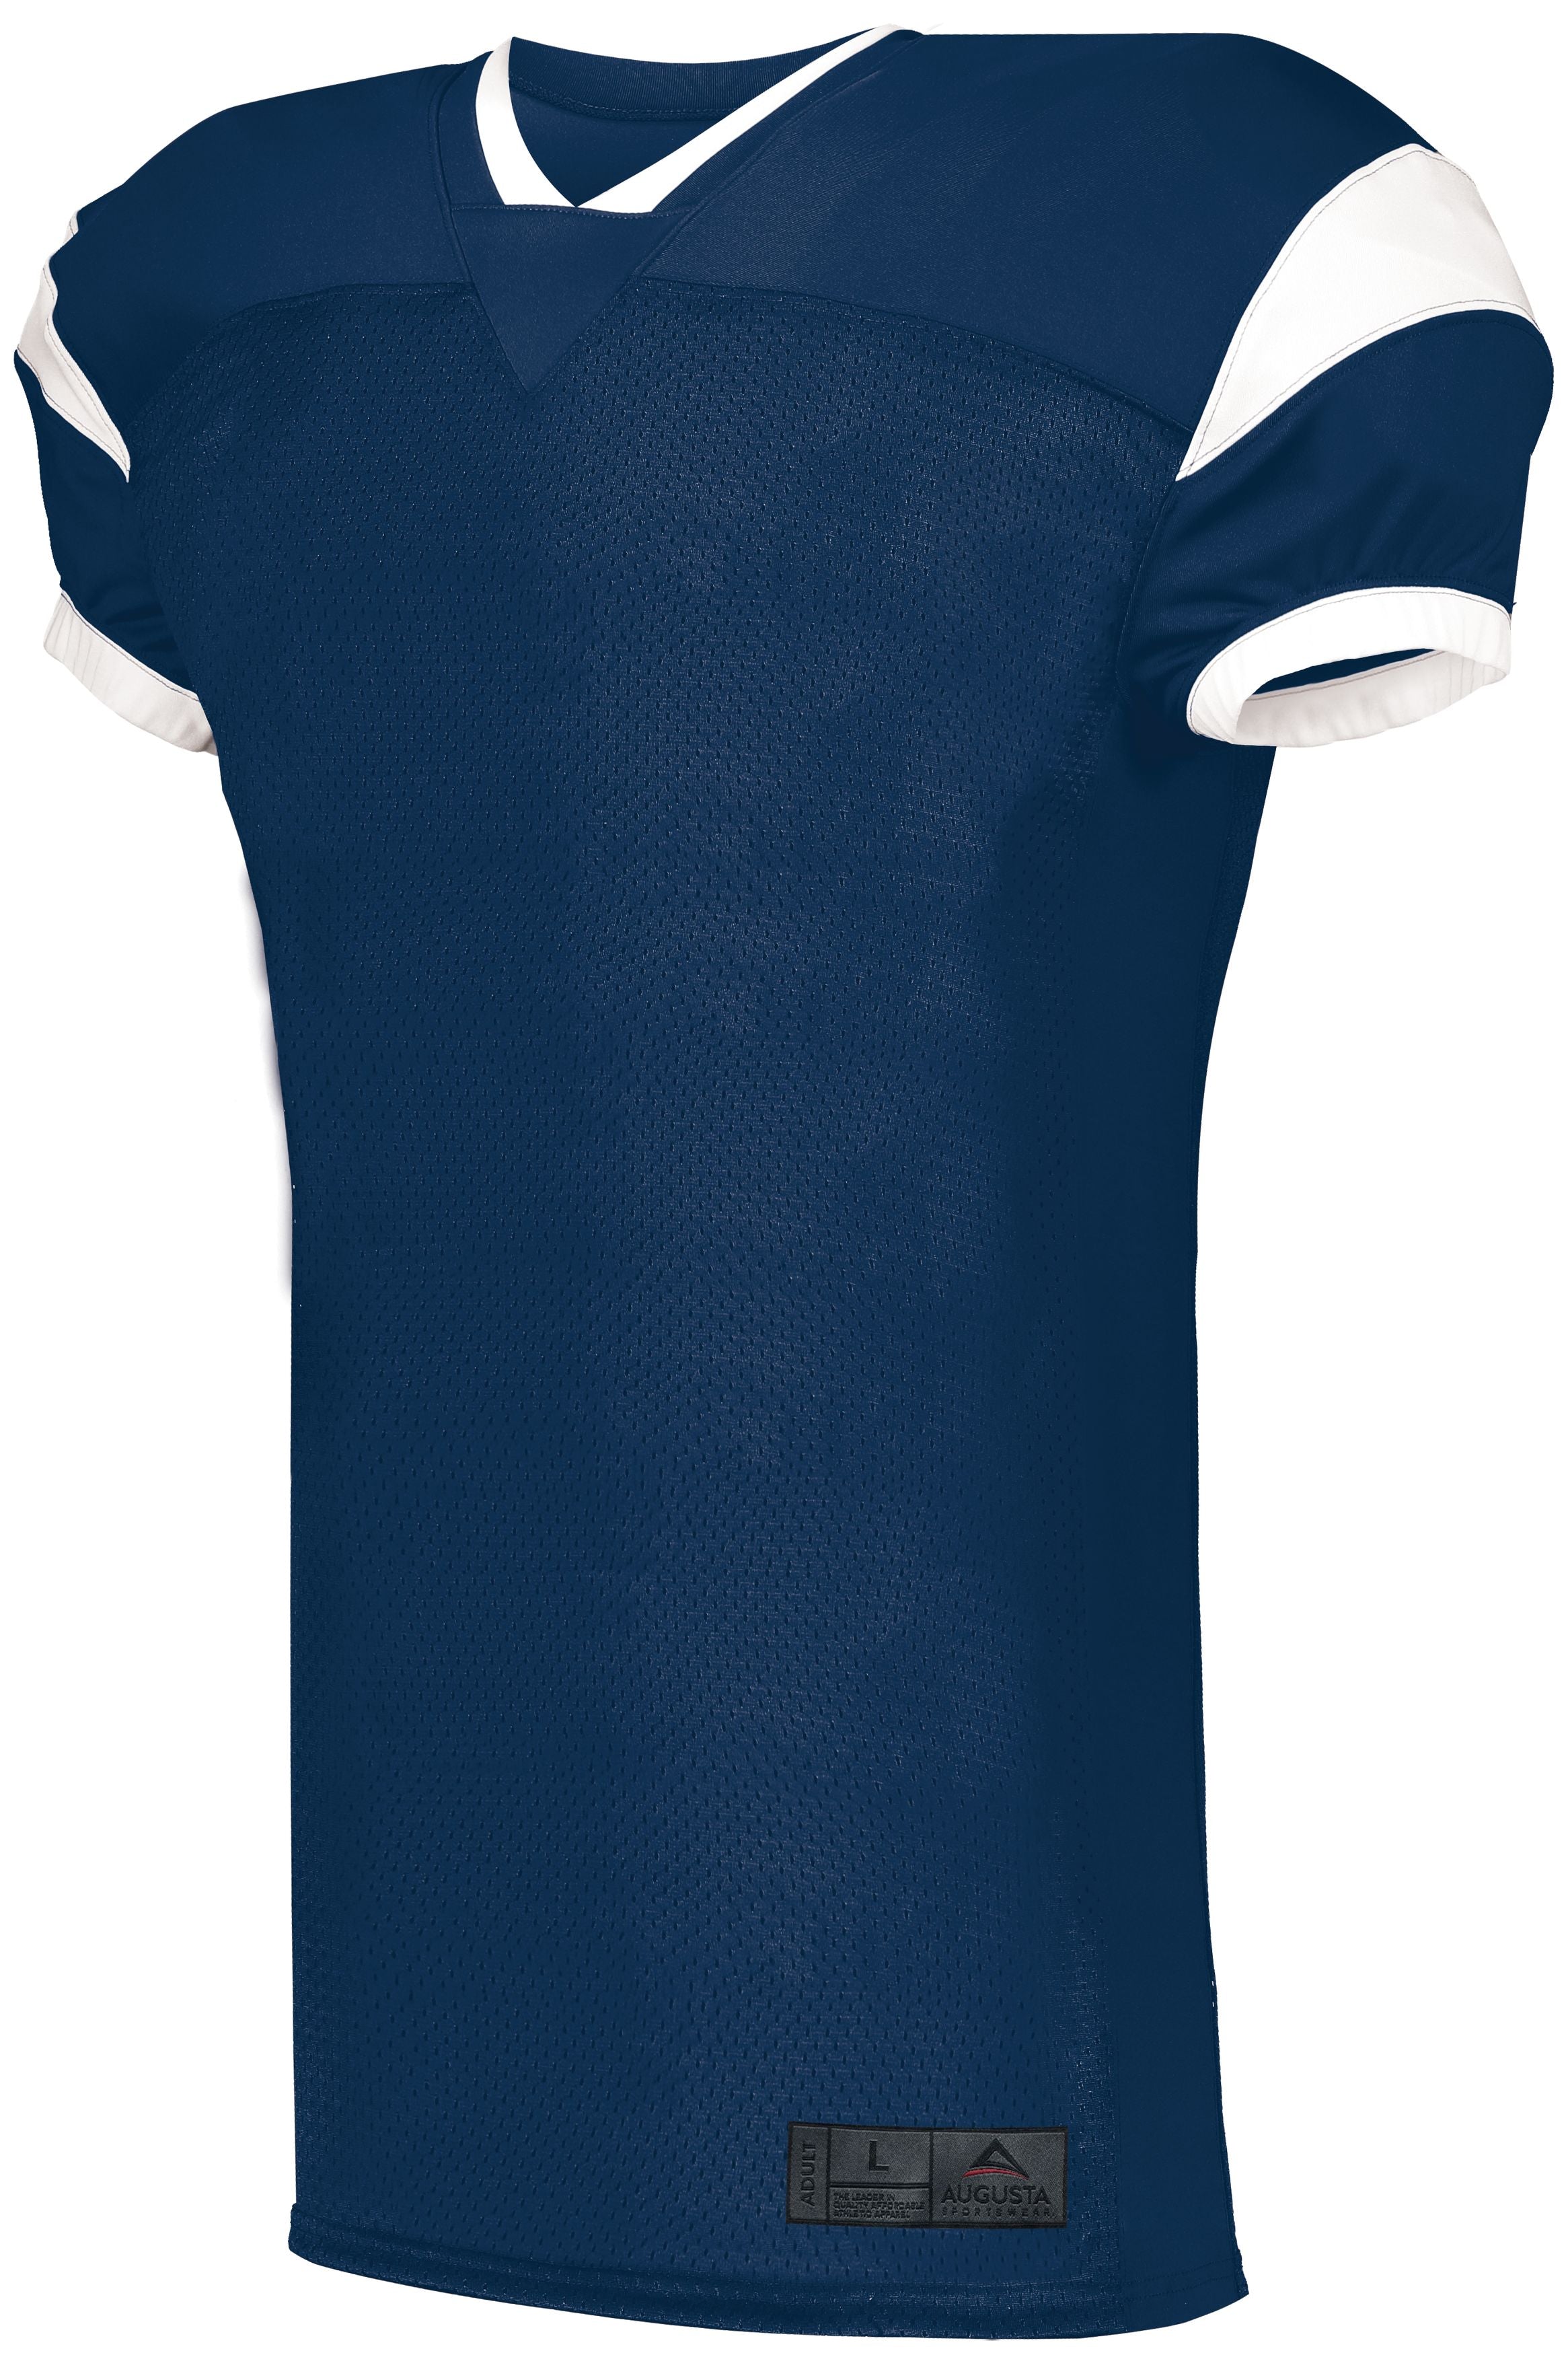 Augusta Sportswear Slant Football Jersey in Navy/White  -Part of the Adult, Adult-Jersey, Augusta-Products, Football, Shirts, All-Sports, All-Sports-1 product lines at KanaleyCreations.com